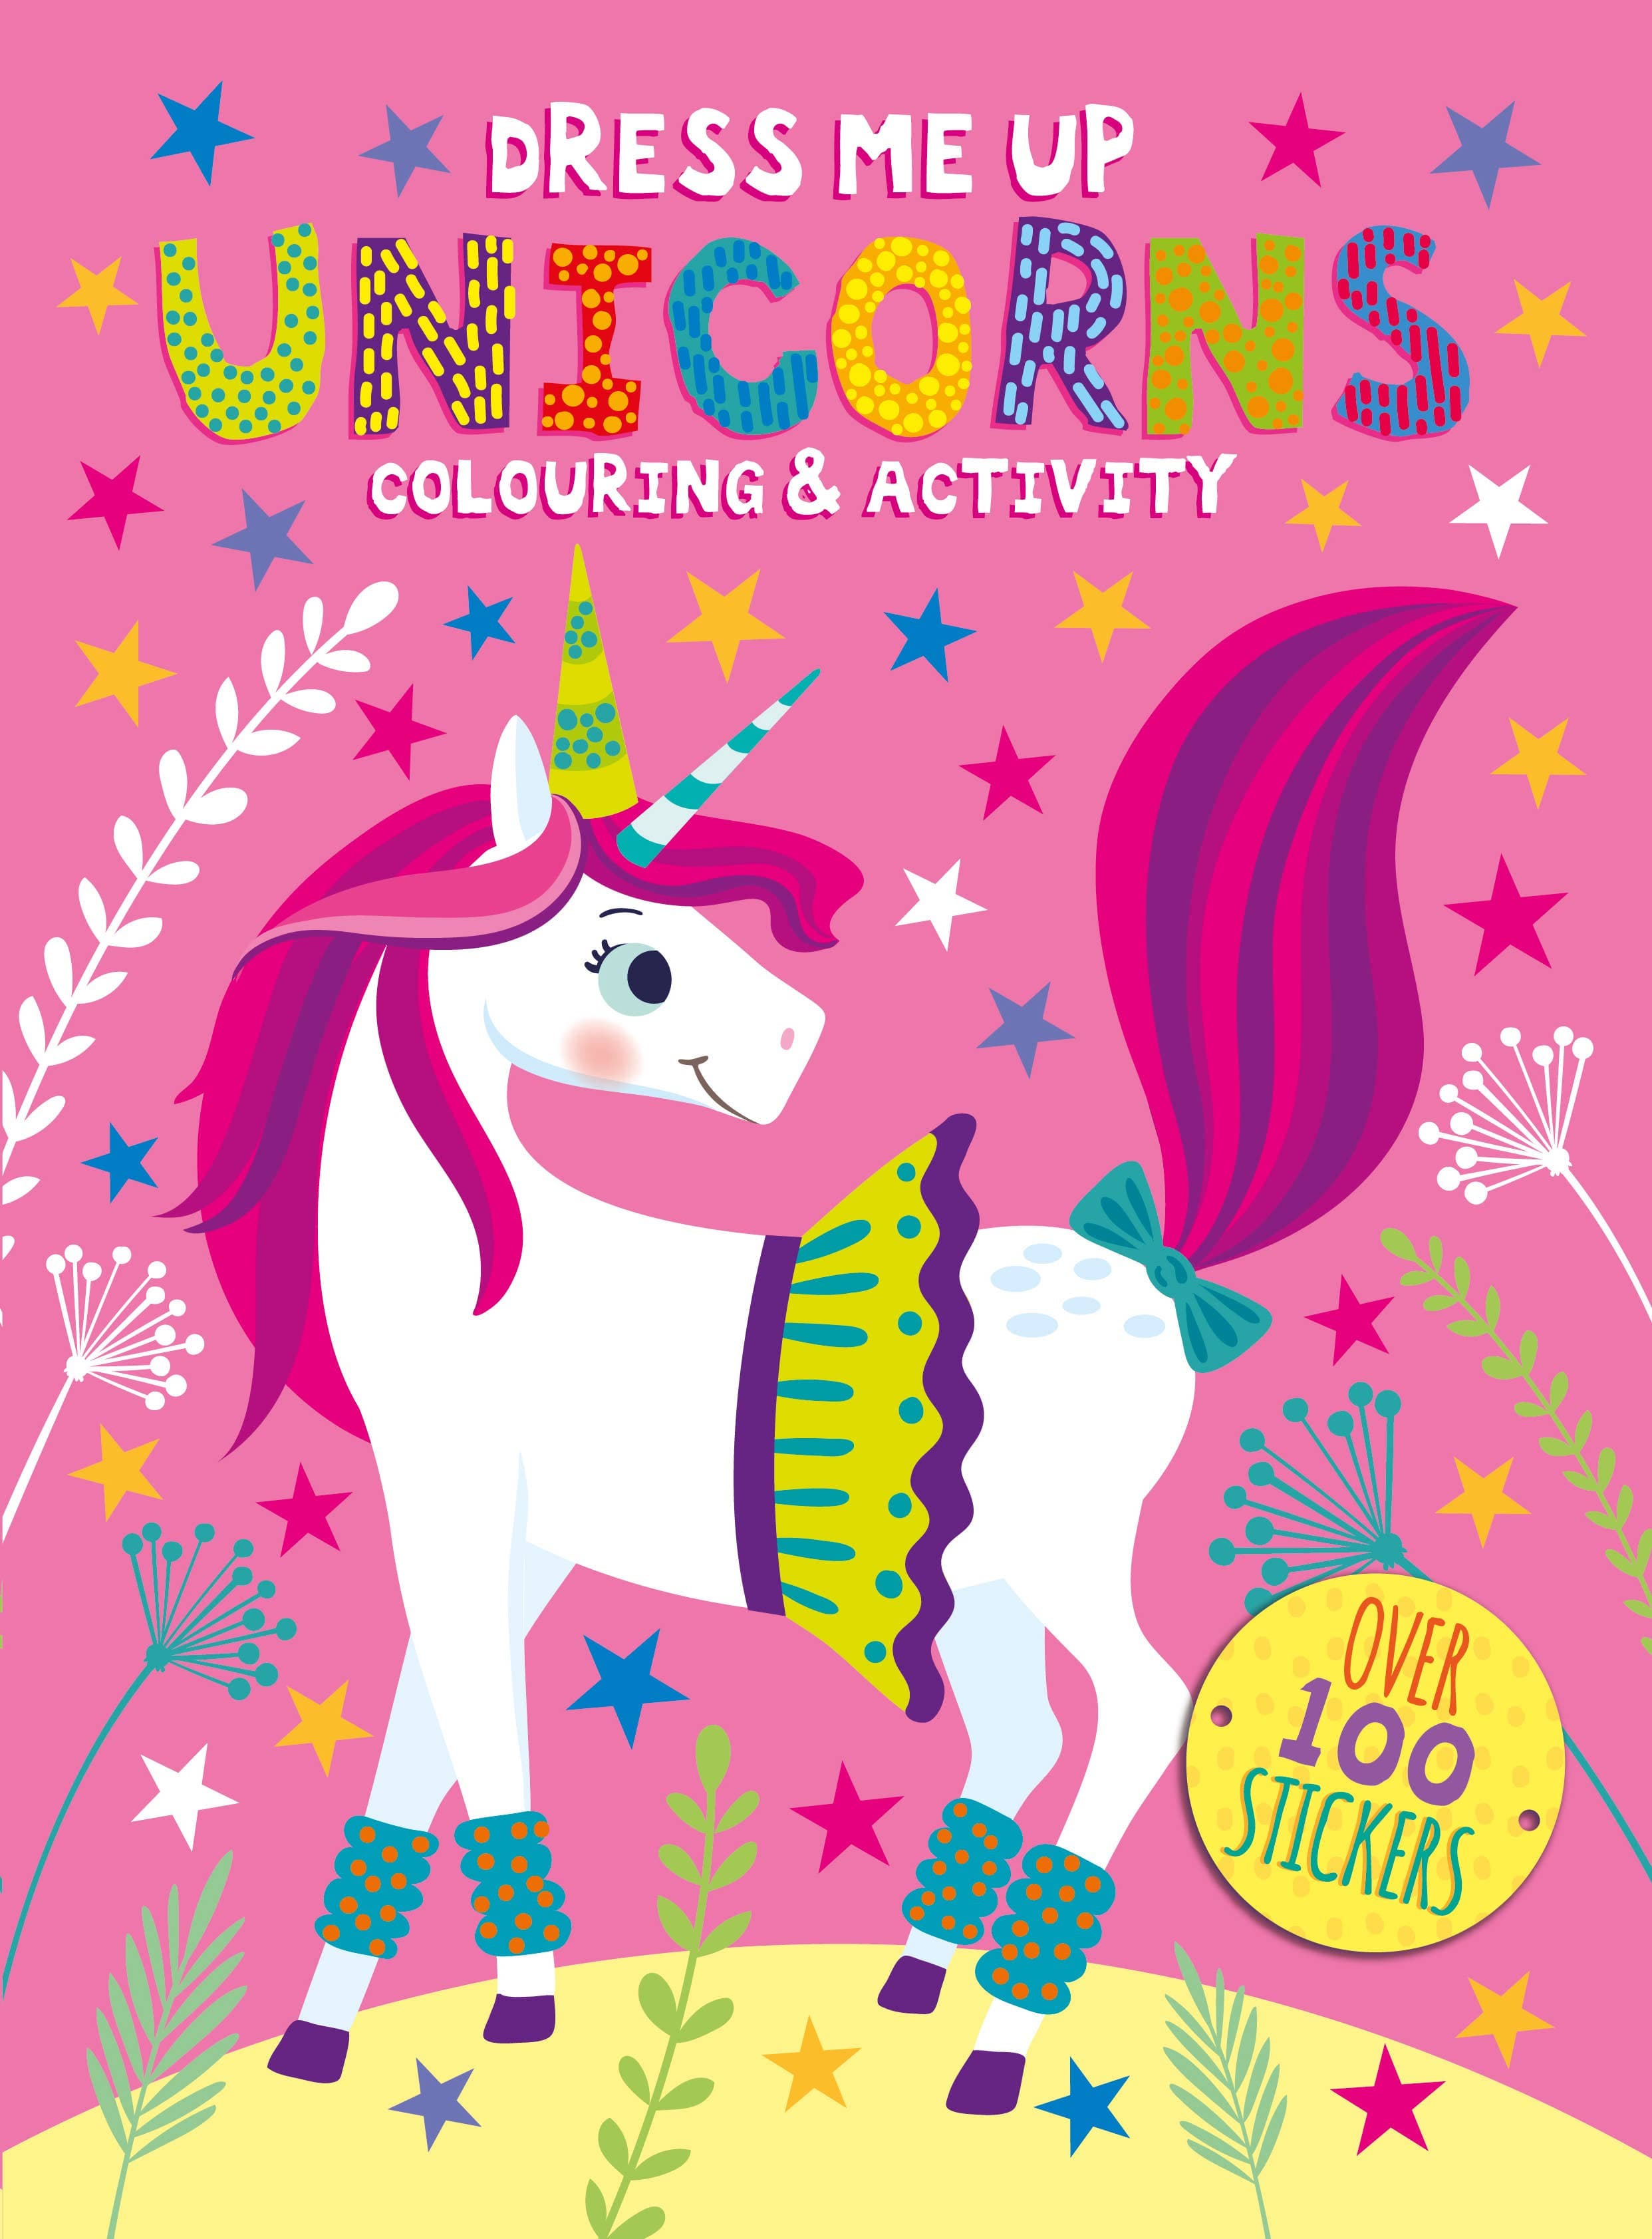 Dress Me Up Colouring and Activity Book - Unicorns.